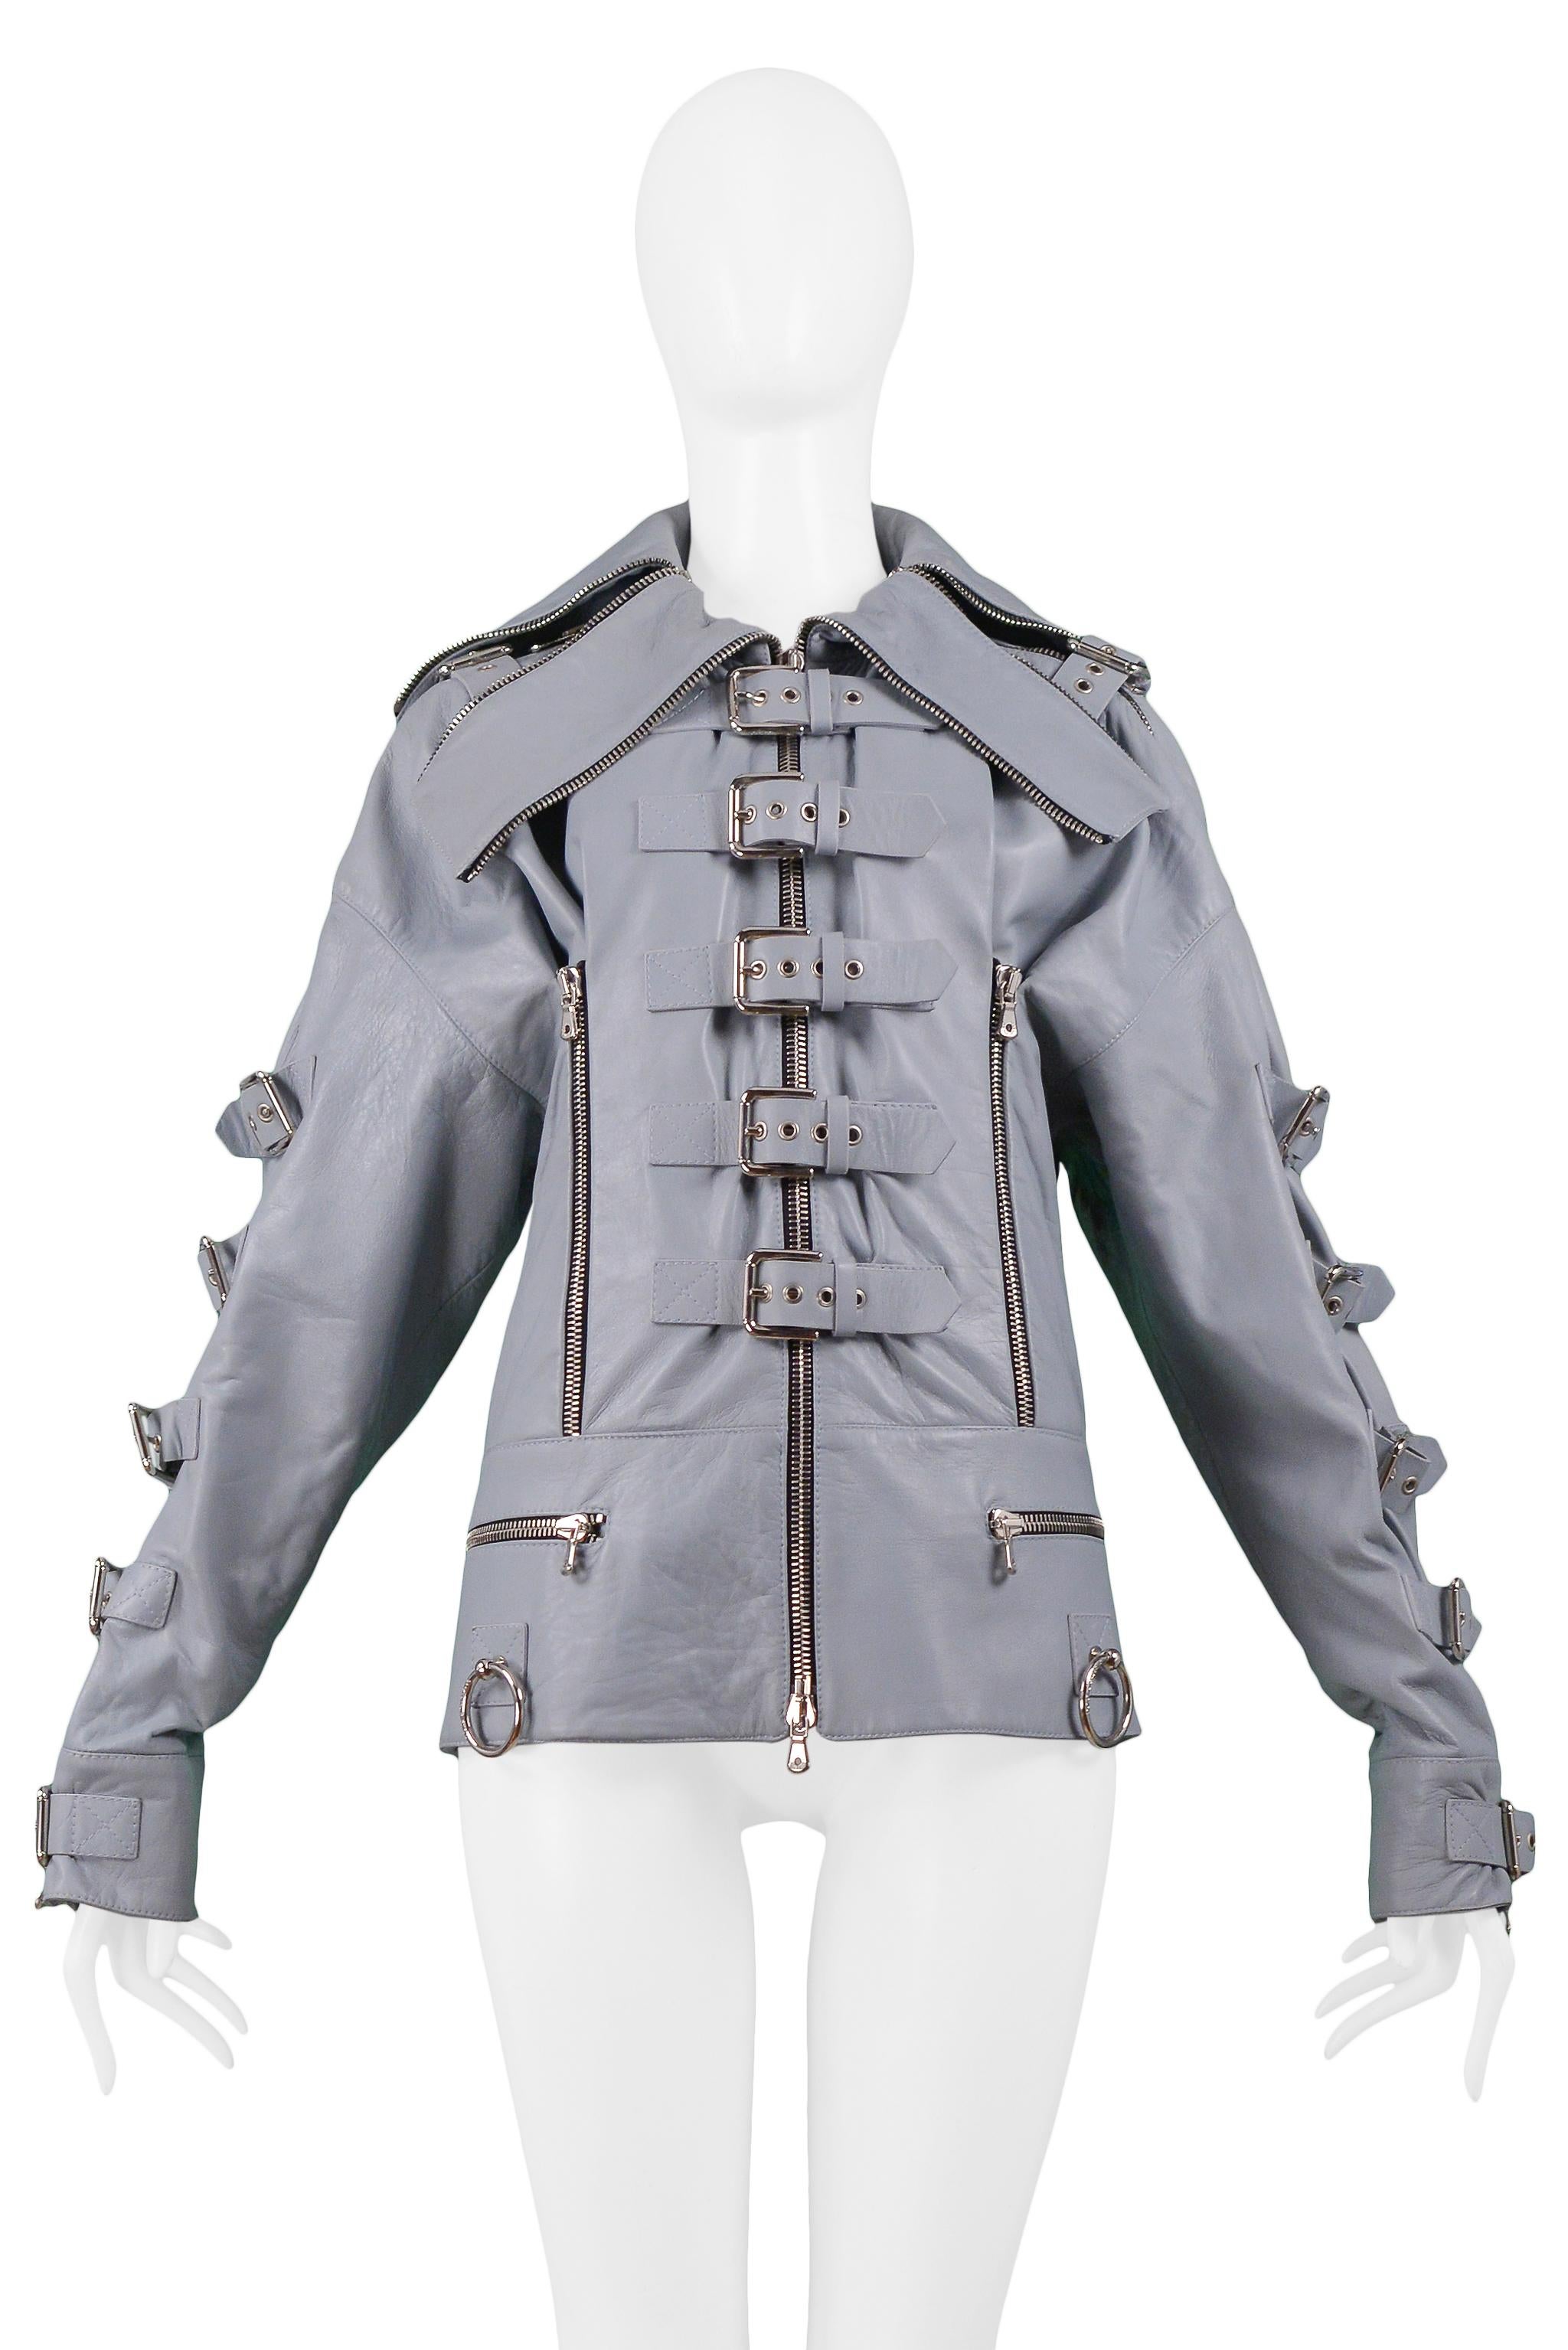 Resurrection Vintage is excited to offer a vintage Dolce & Gabbana grey lambskin leather biker jacket from the 2003 runway collection. The jacket features a large collar, long sleeves, and center front zip closure. The jacket is embellished with